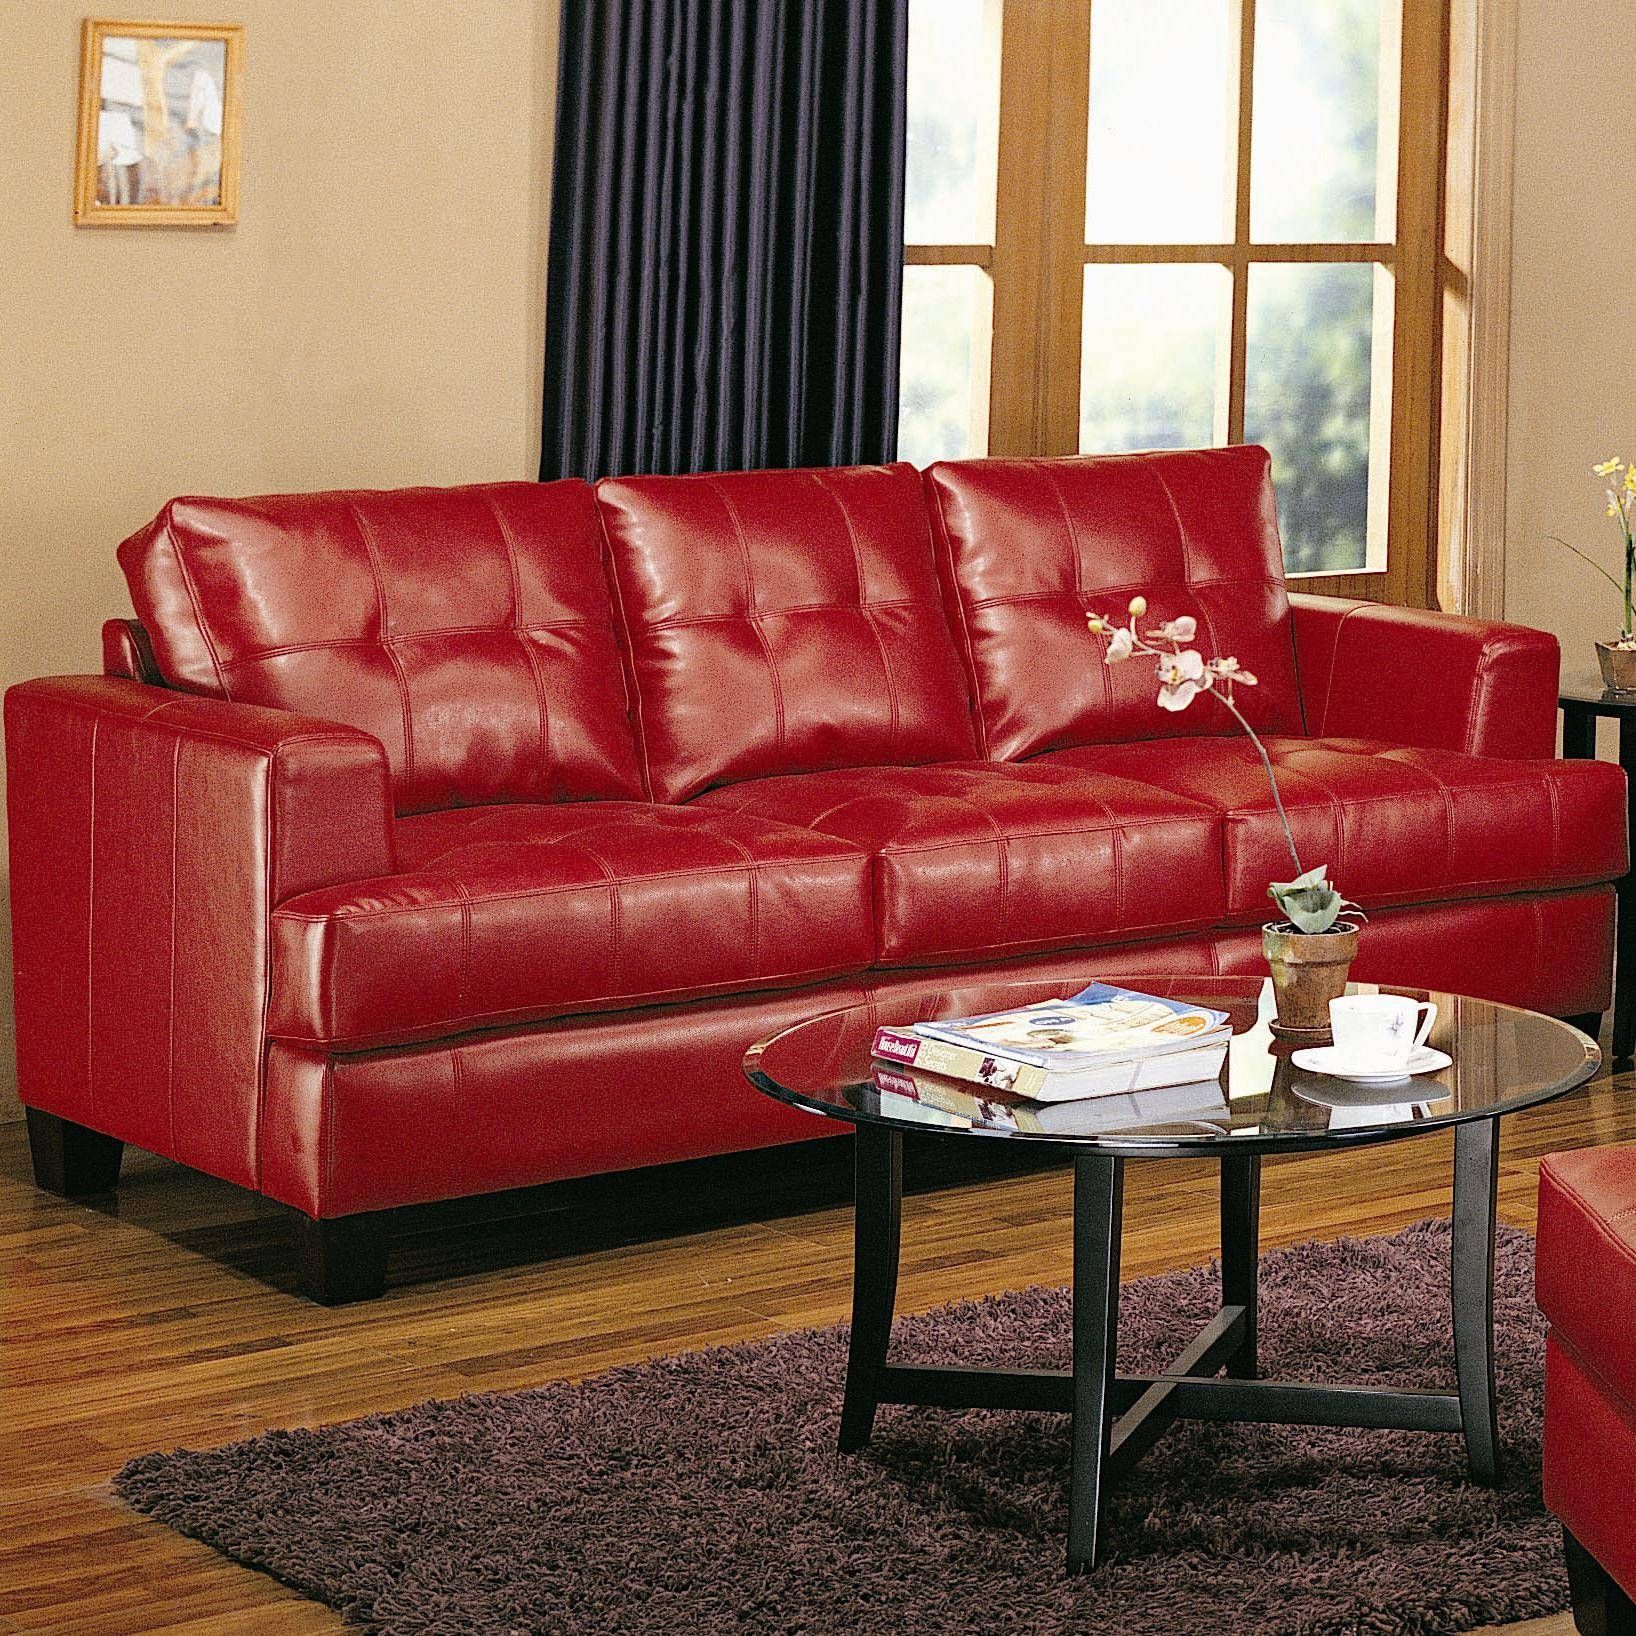 Sofas | Austin's Furniture Depot Pertaining To Dark Red Leather Couches (View 9 of 15)